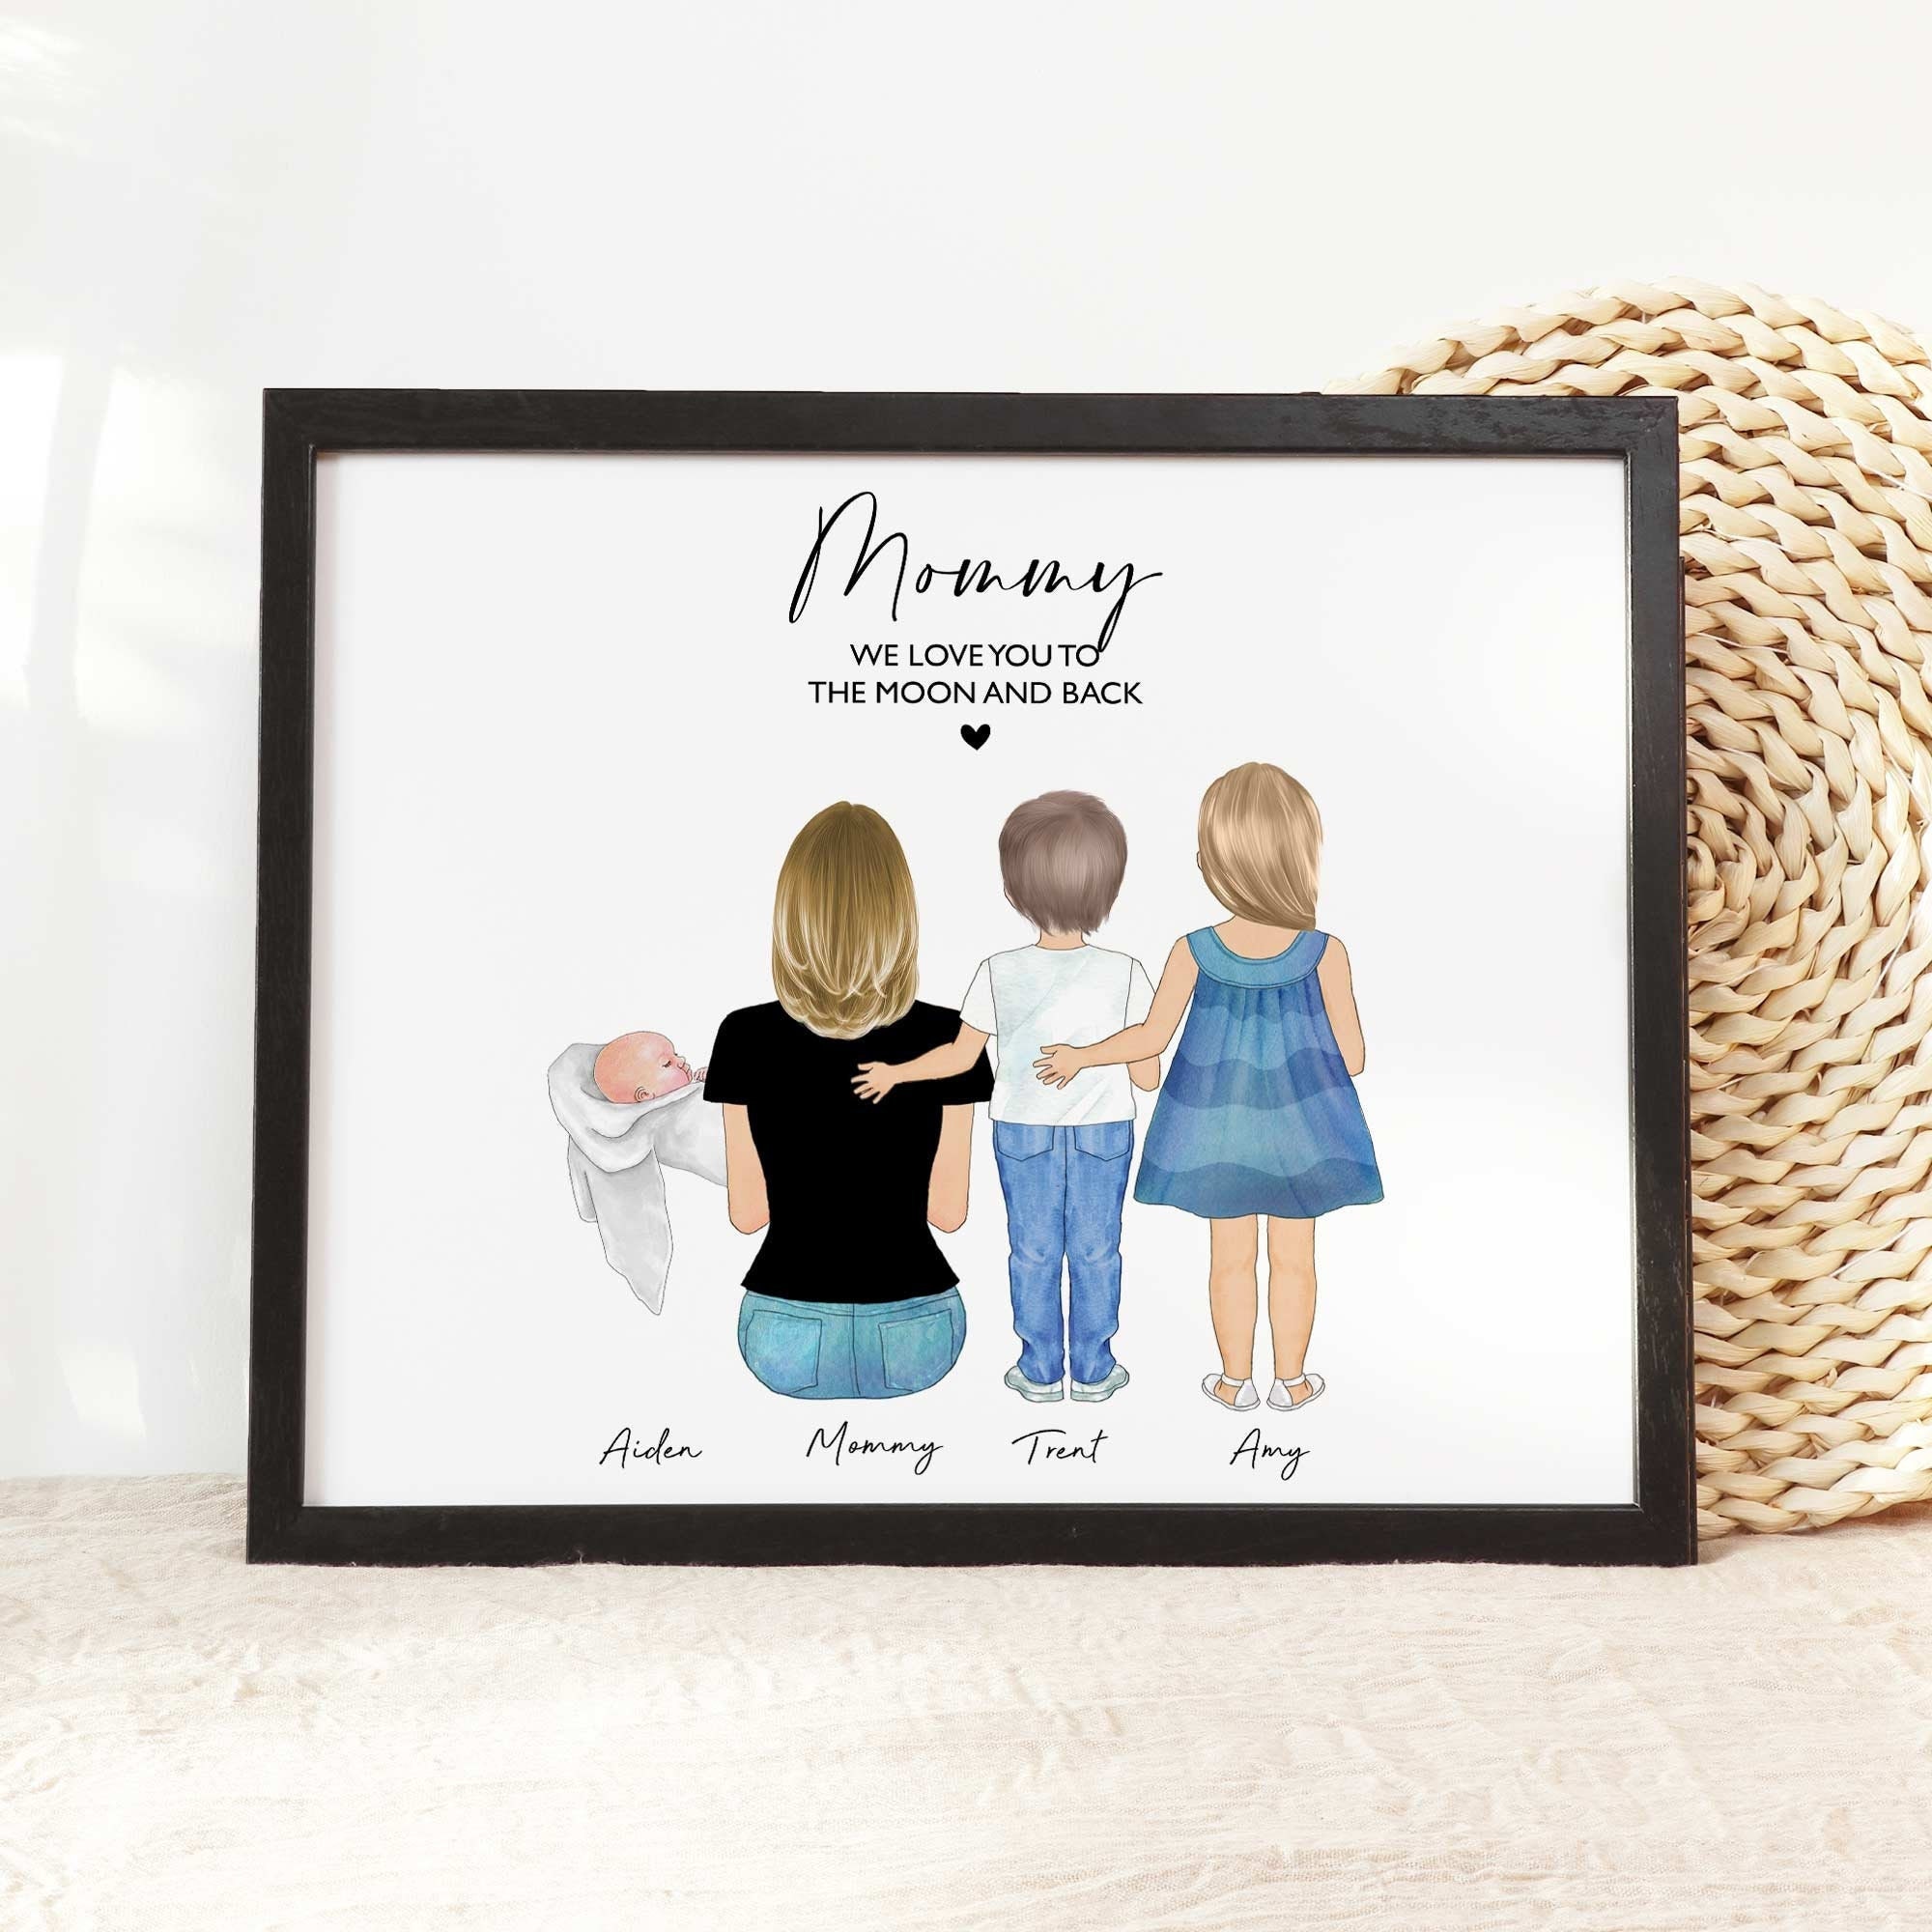 Personalized Thank You Mom Canvas, Unique Photo Gift for Mom from Daughter  or Son